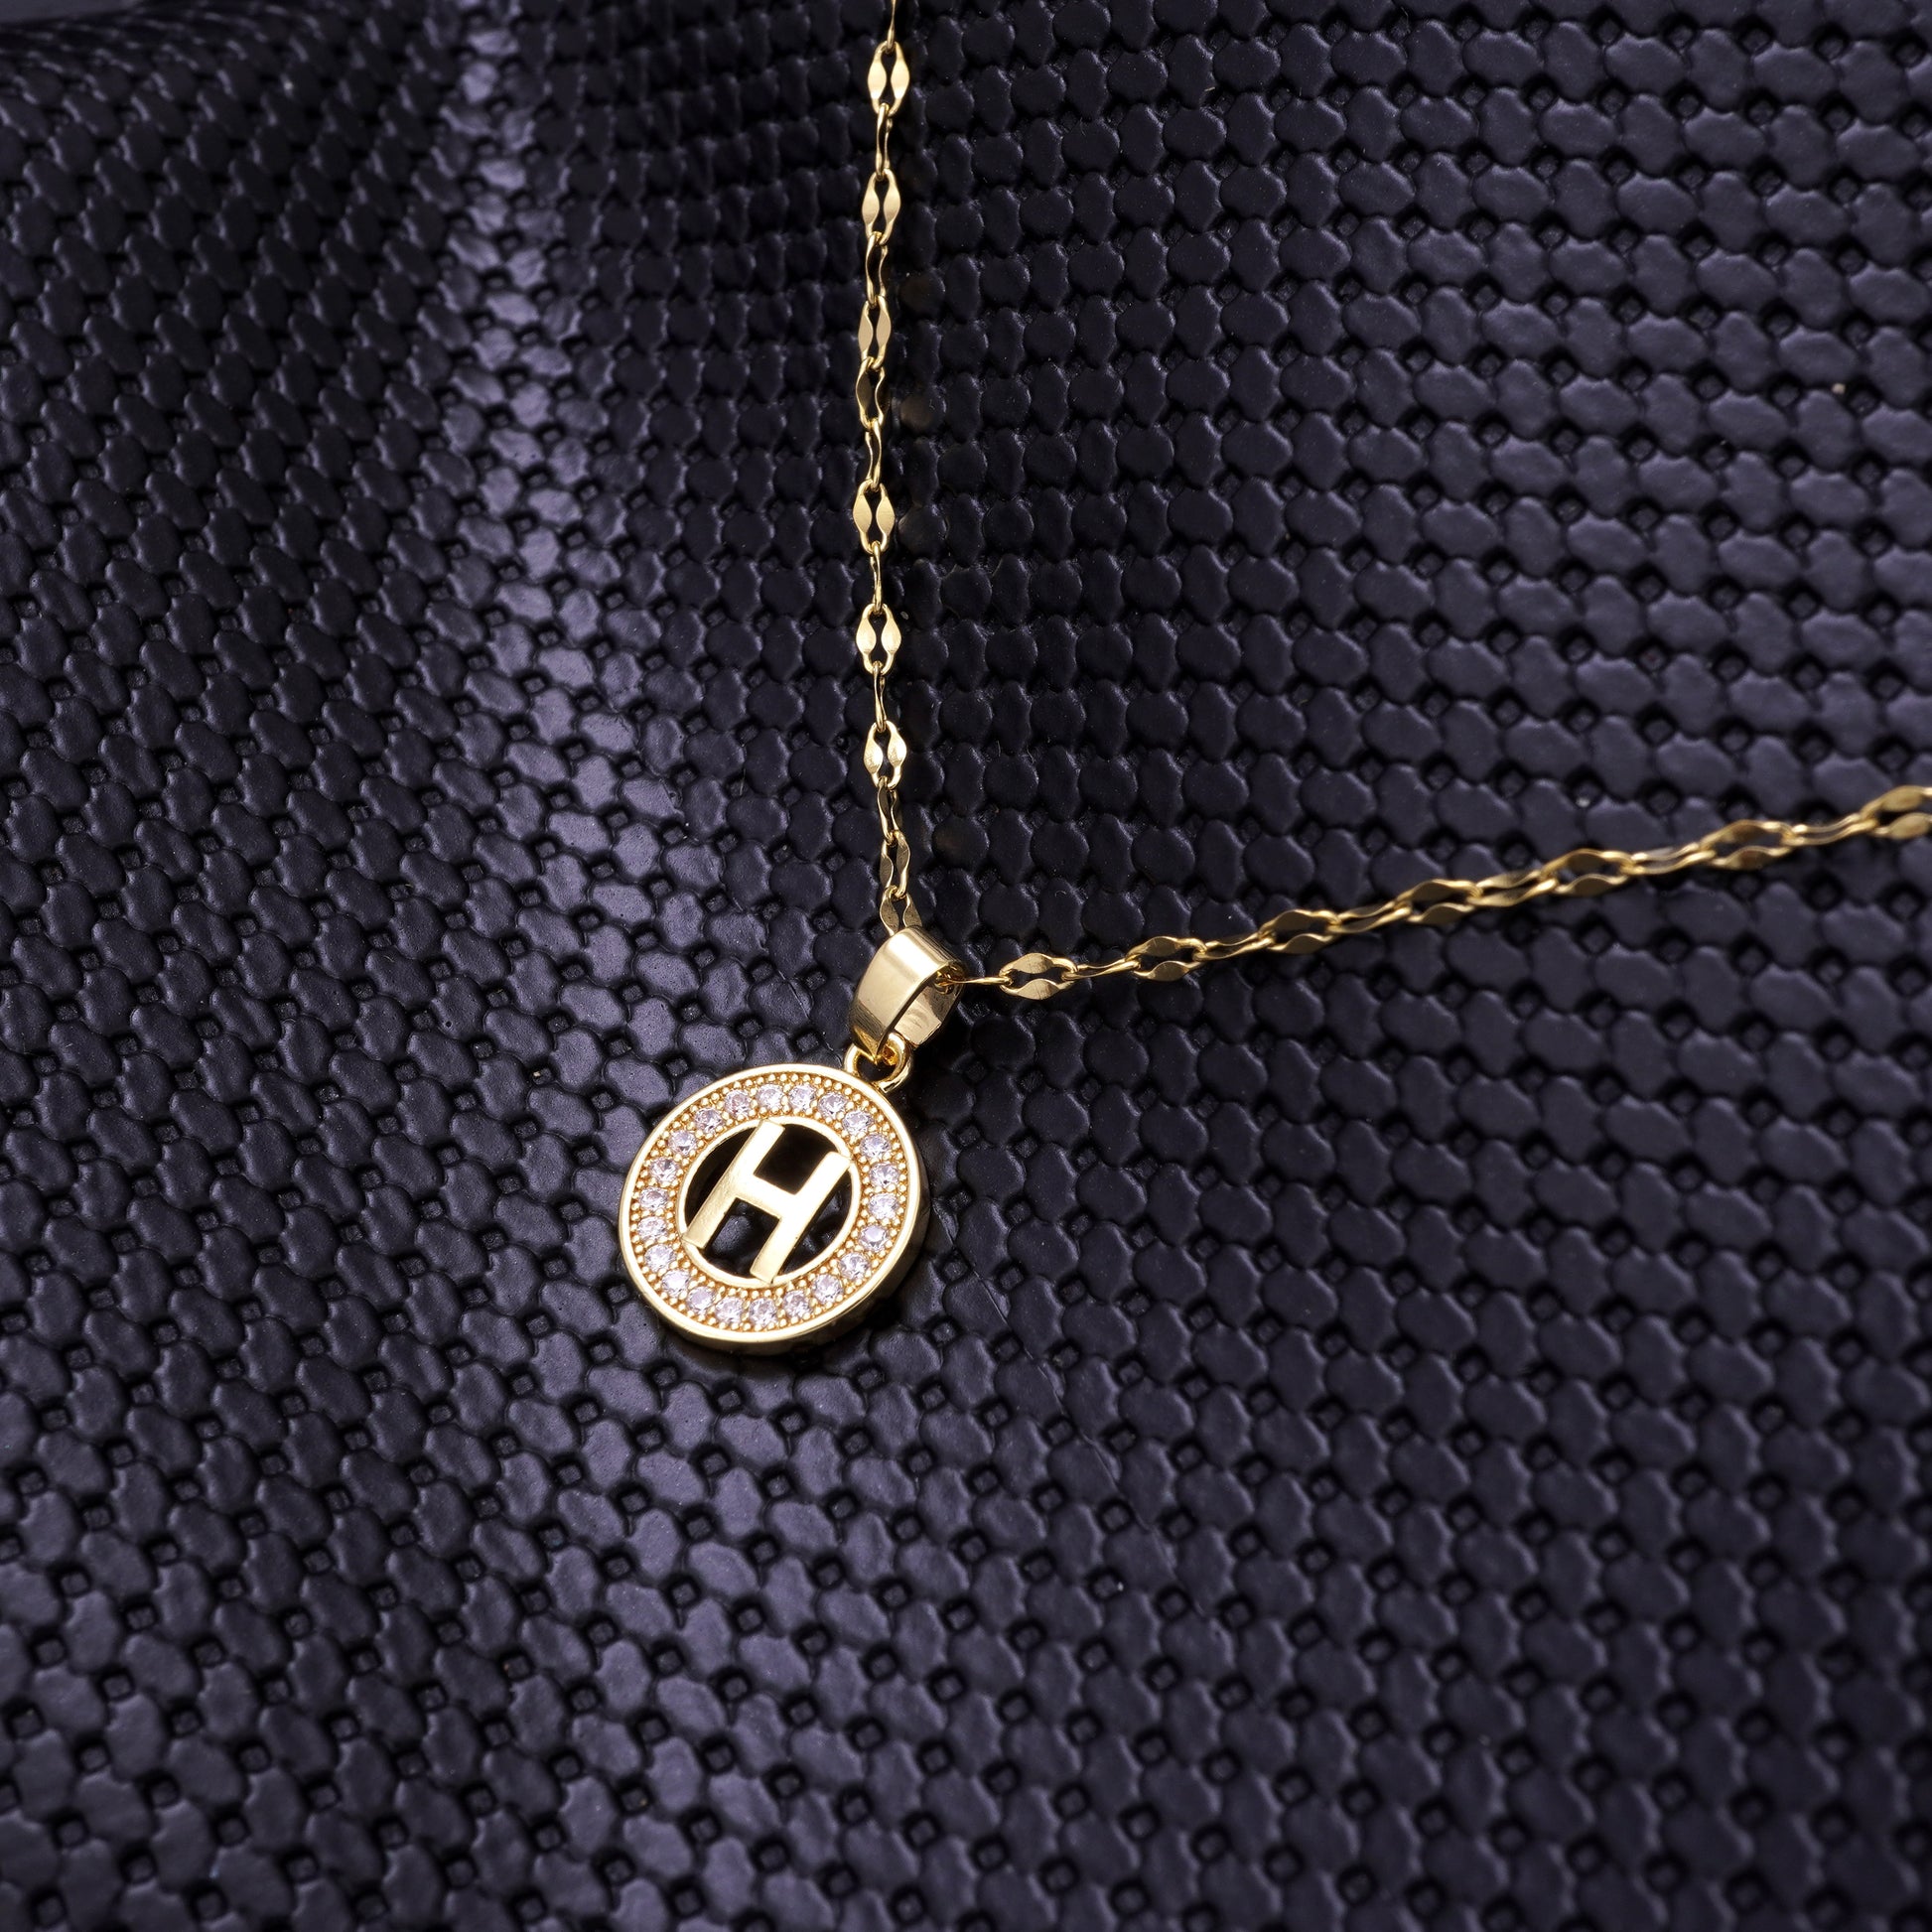 H Round Gold Necklace